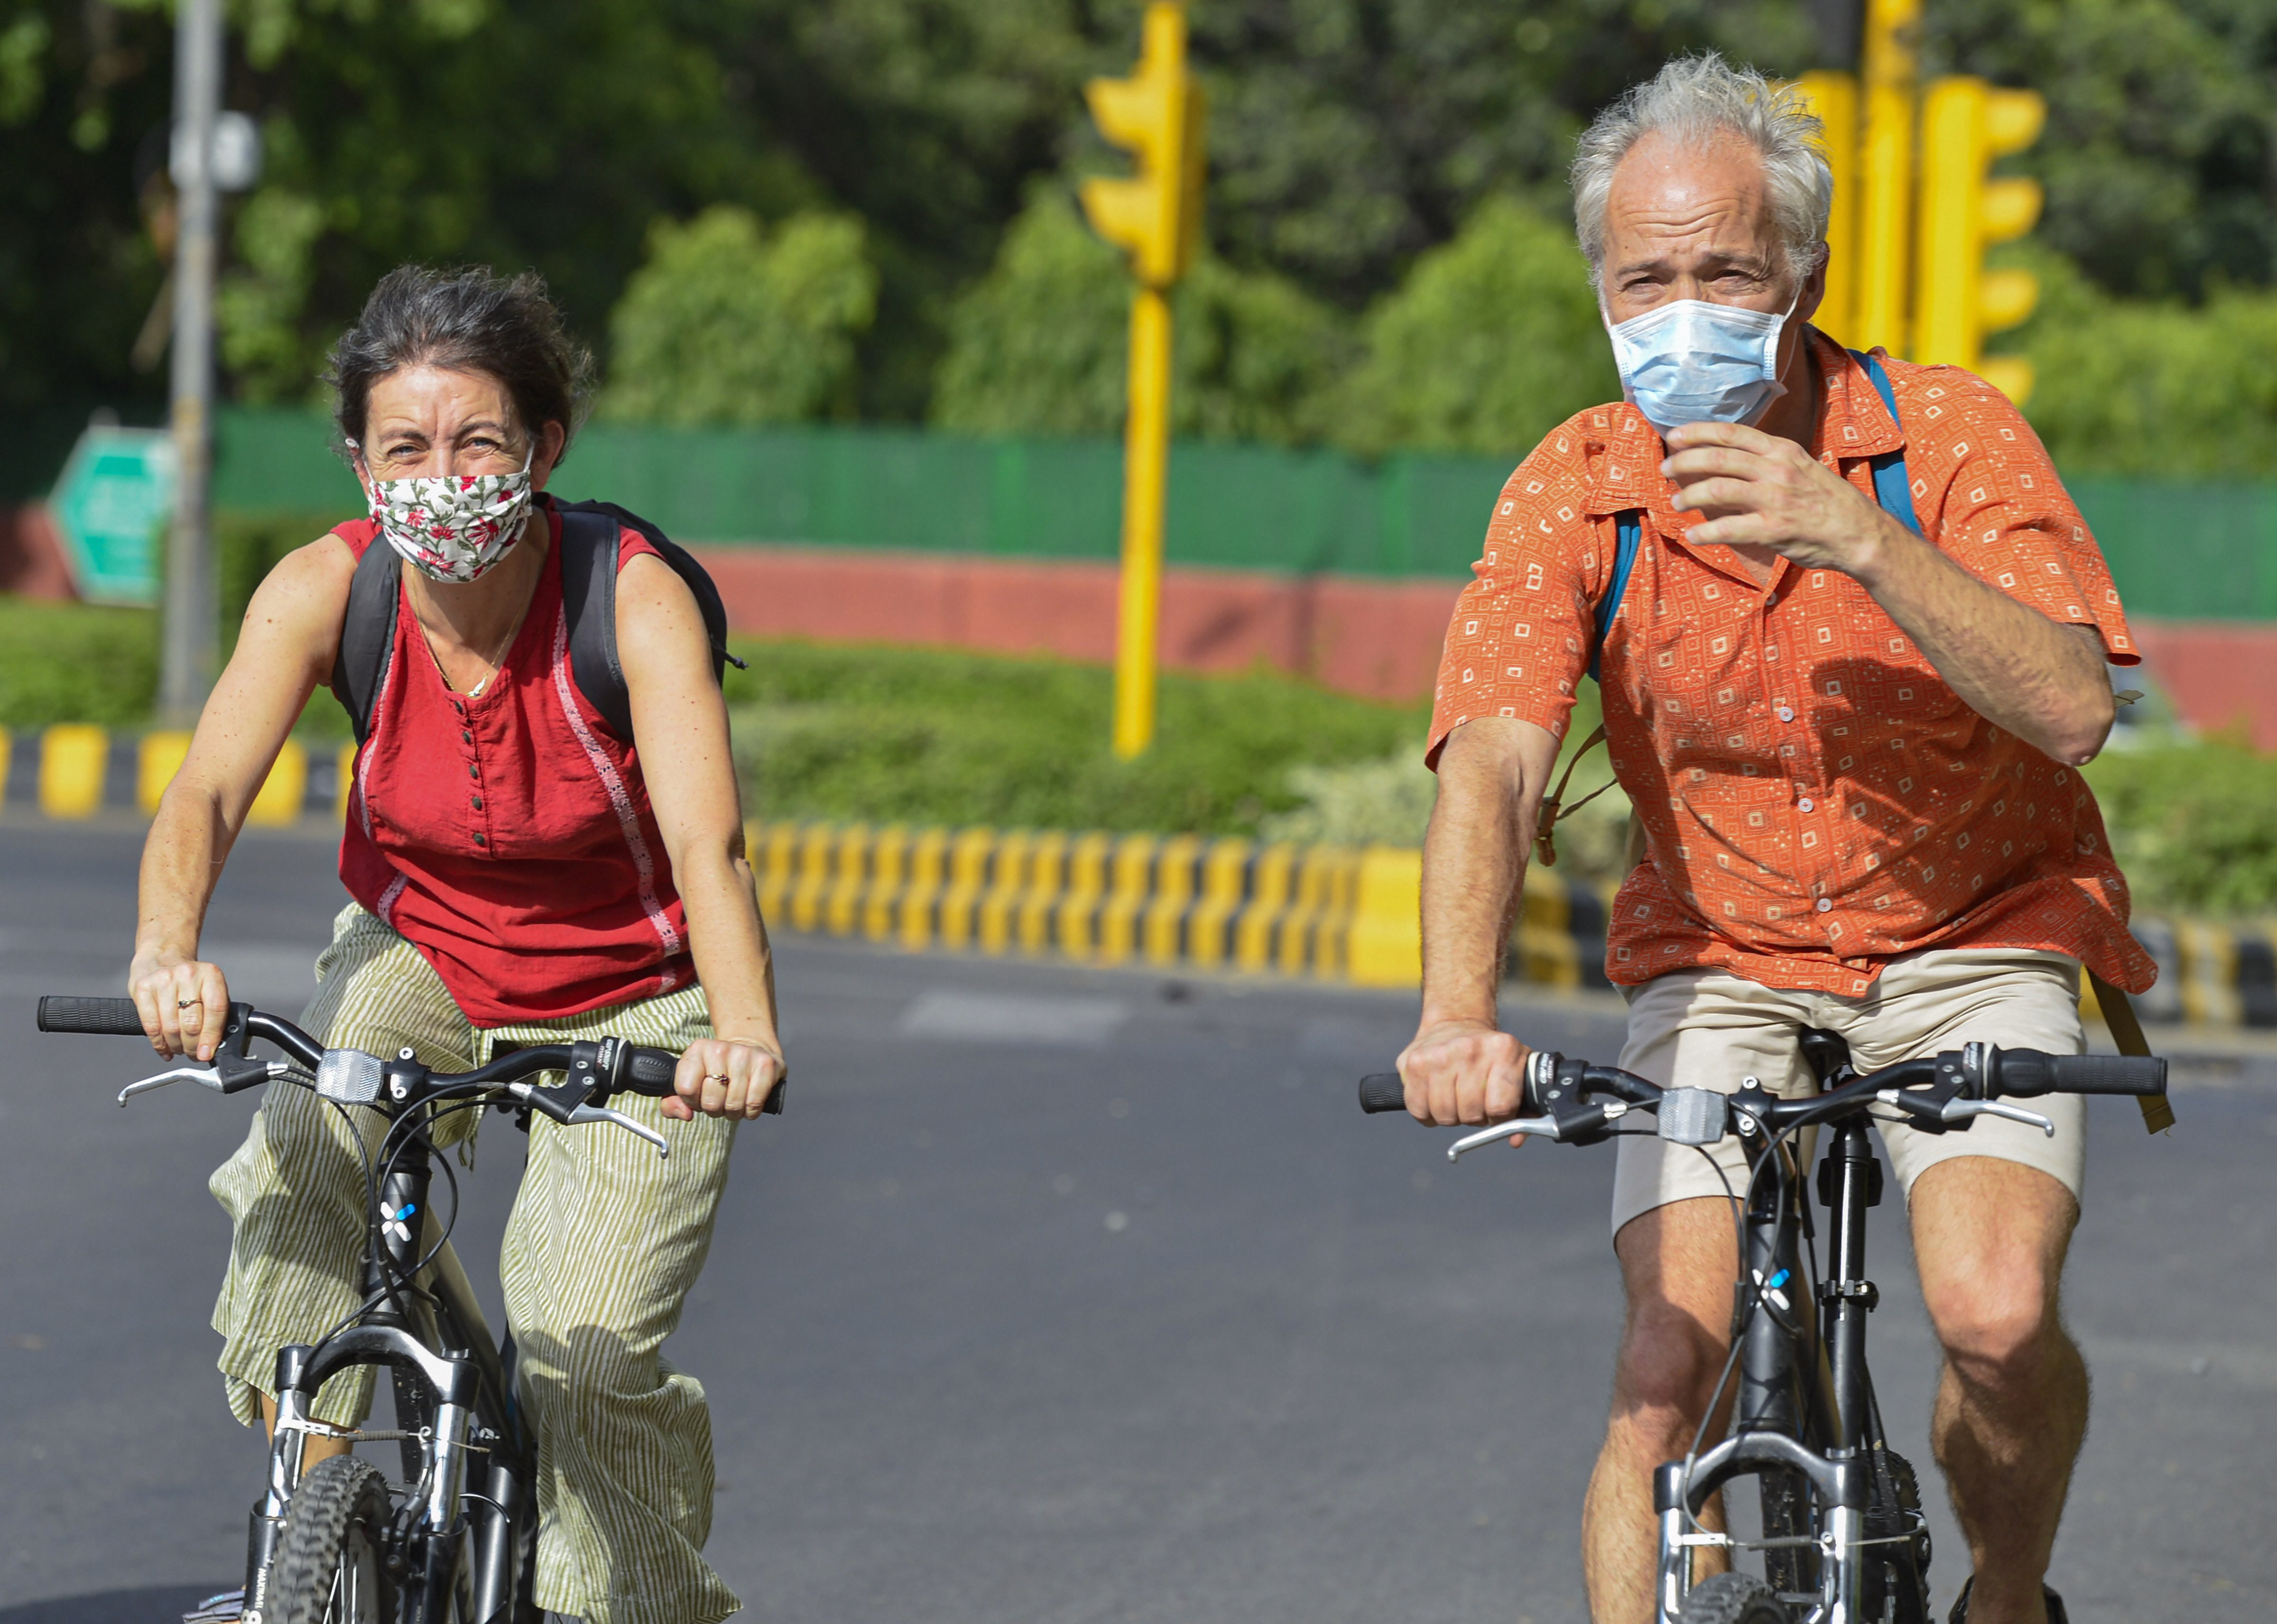 New Delhi: Foreigners, wearing masks, ride on bicycles during the ongoing nationwide Covid-19 lockdown, in New Delhi, Saturday, May 23, 2020